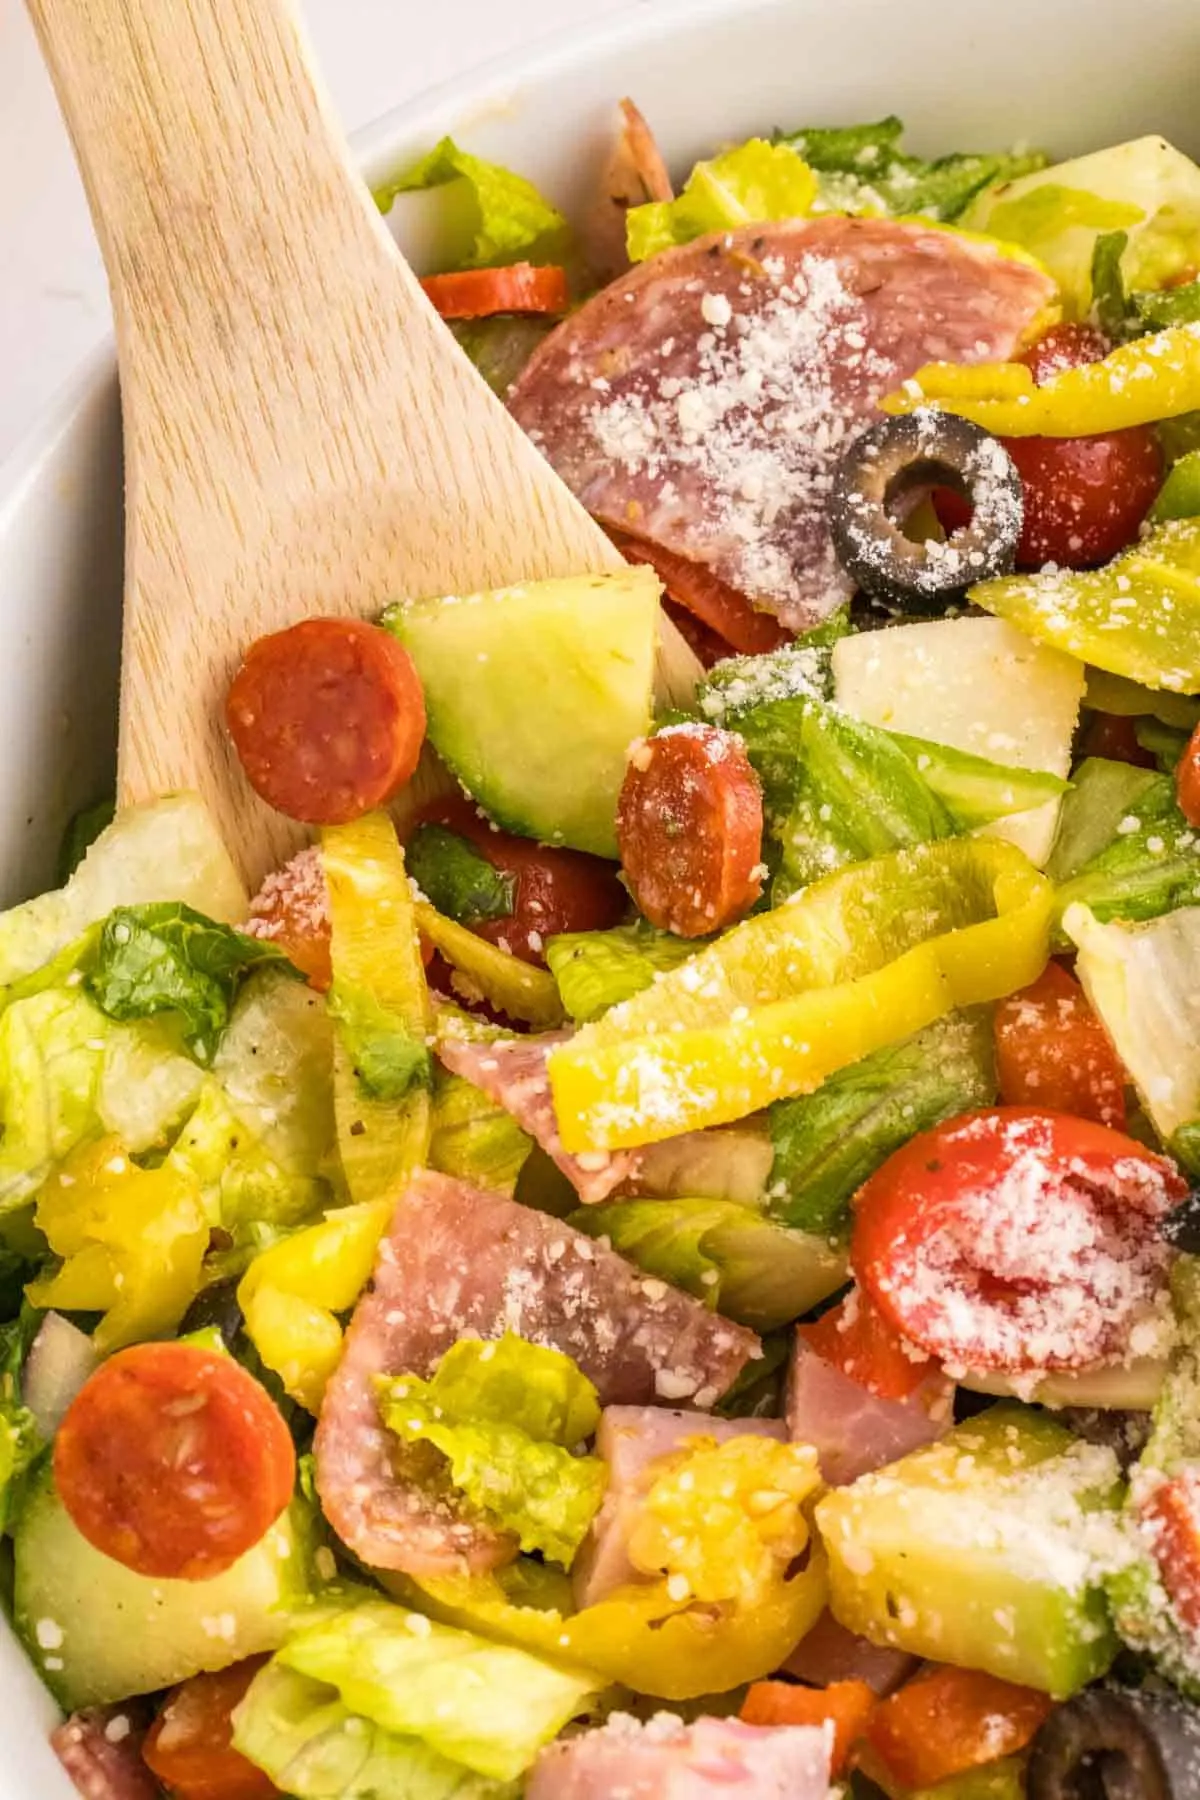 Italian Sub Salad is a delicious dish loaded with romaine, olives, tomatoes, cucumber, ham, pepperoni, peppers, onions and salami all tossed in a red wine vinegar dressing.